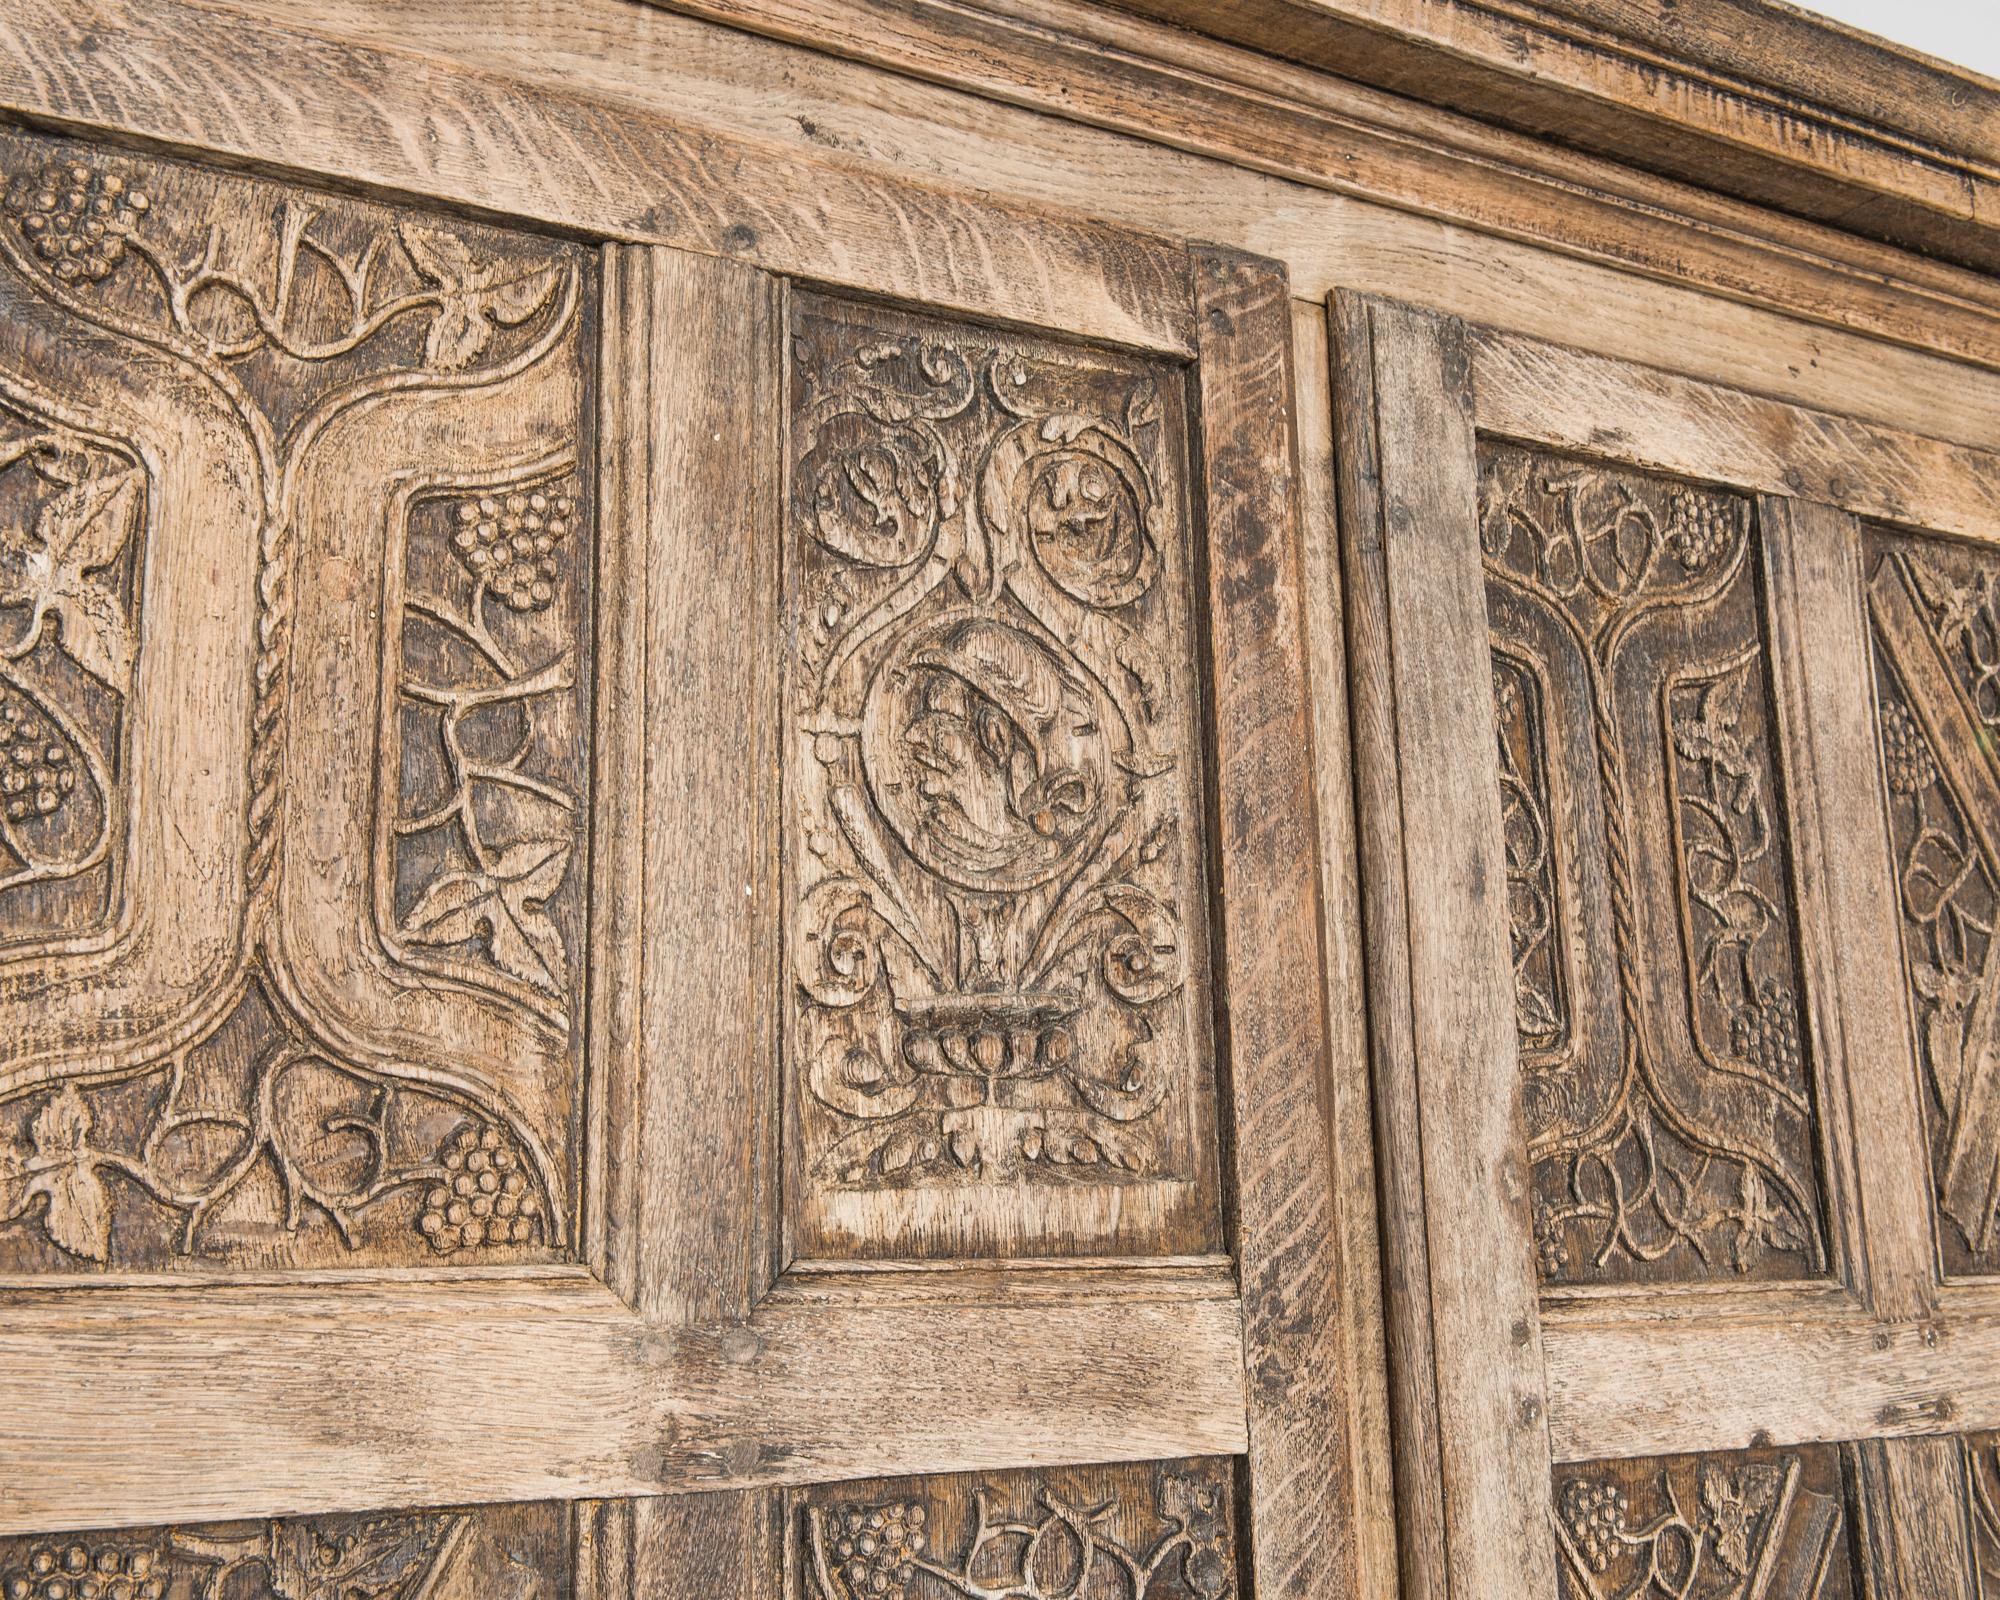 The intricacy of the carved panelling gives this oak cabinet the impression of an illuminated manuscript. Made in France in the 1860s, the double doors are divided into sixteen panels, each with a verdant design of brackets and vines. Carved grapes